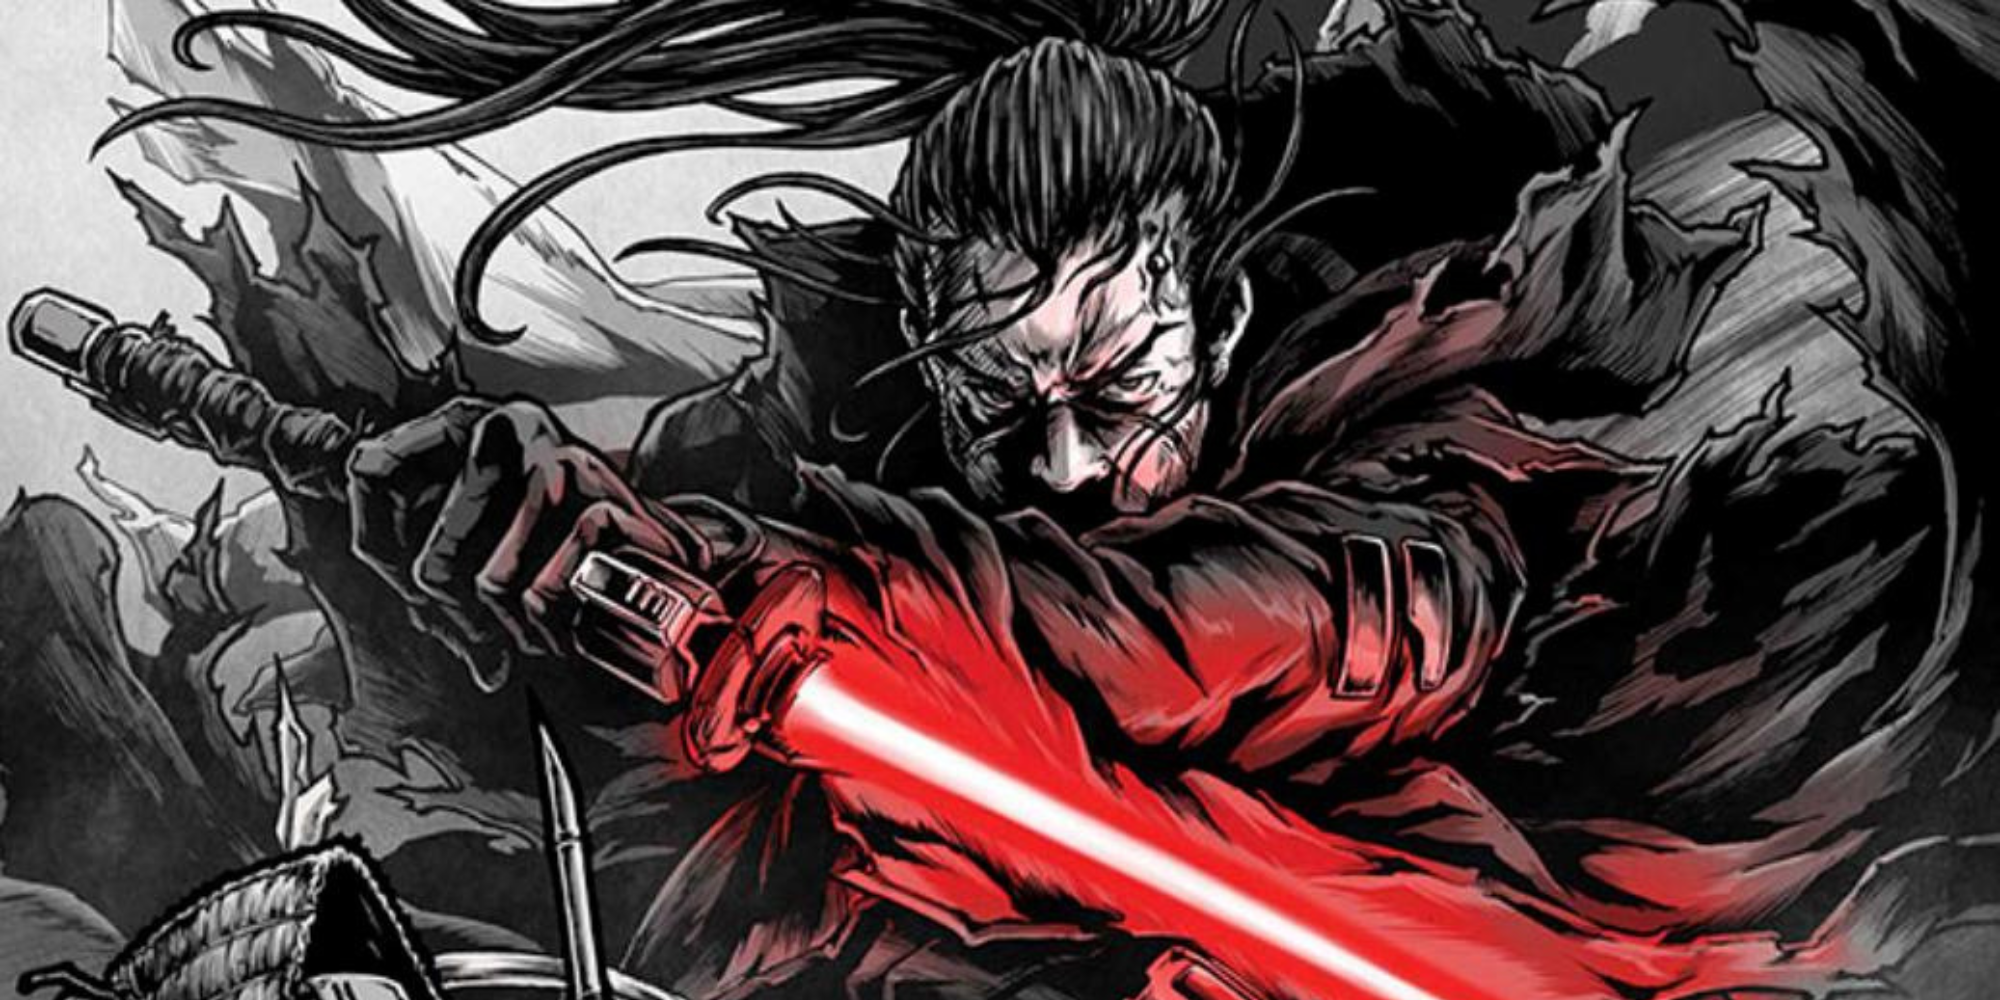 The Ronin from Star Wars Visions with his red lightsaber